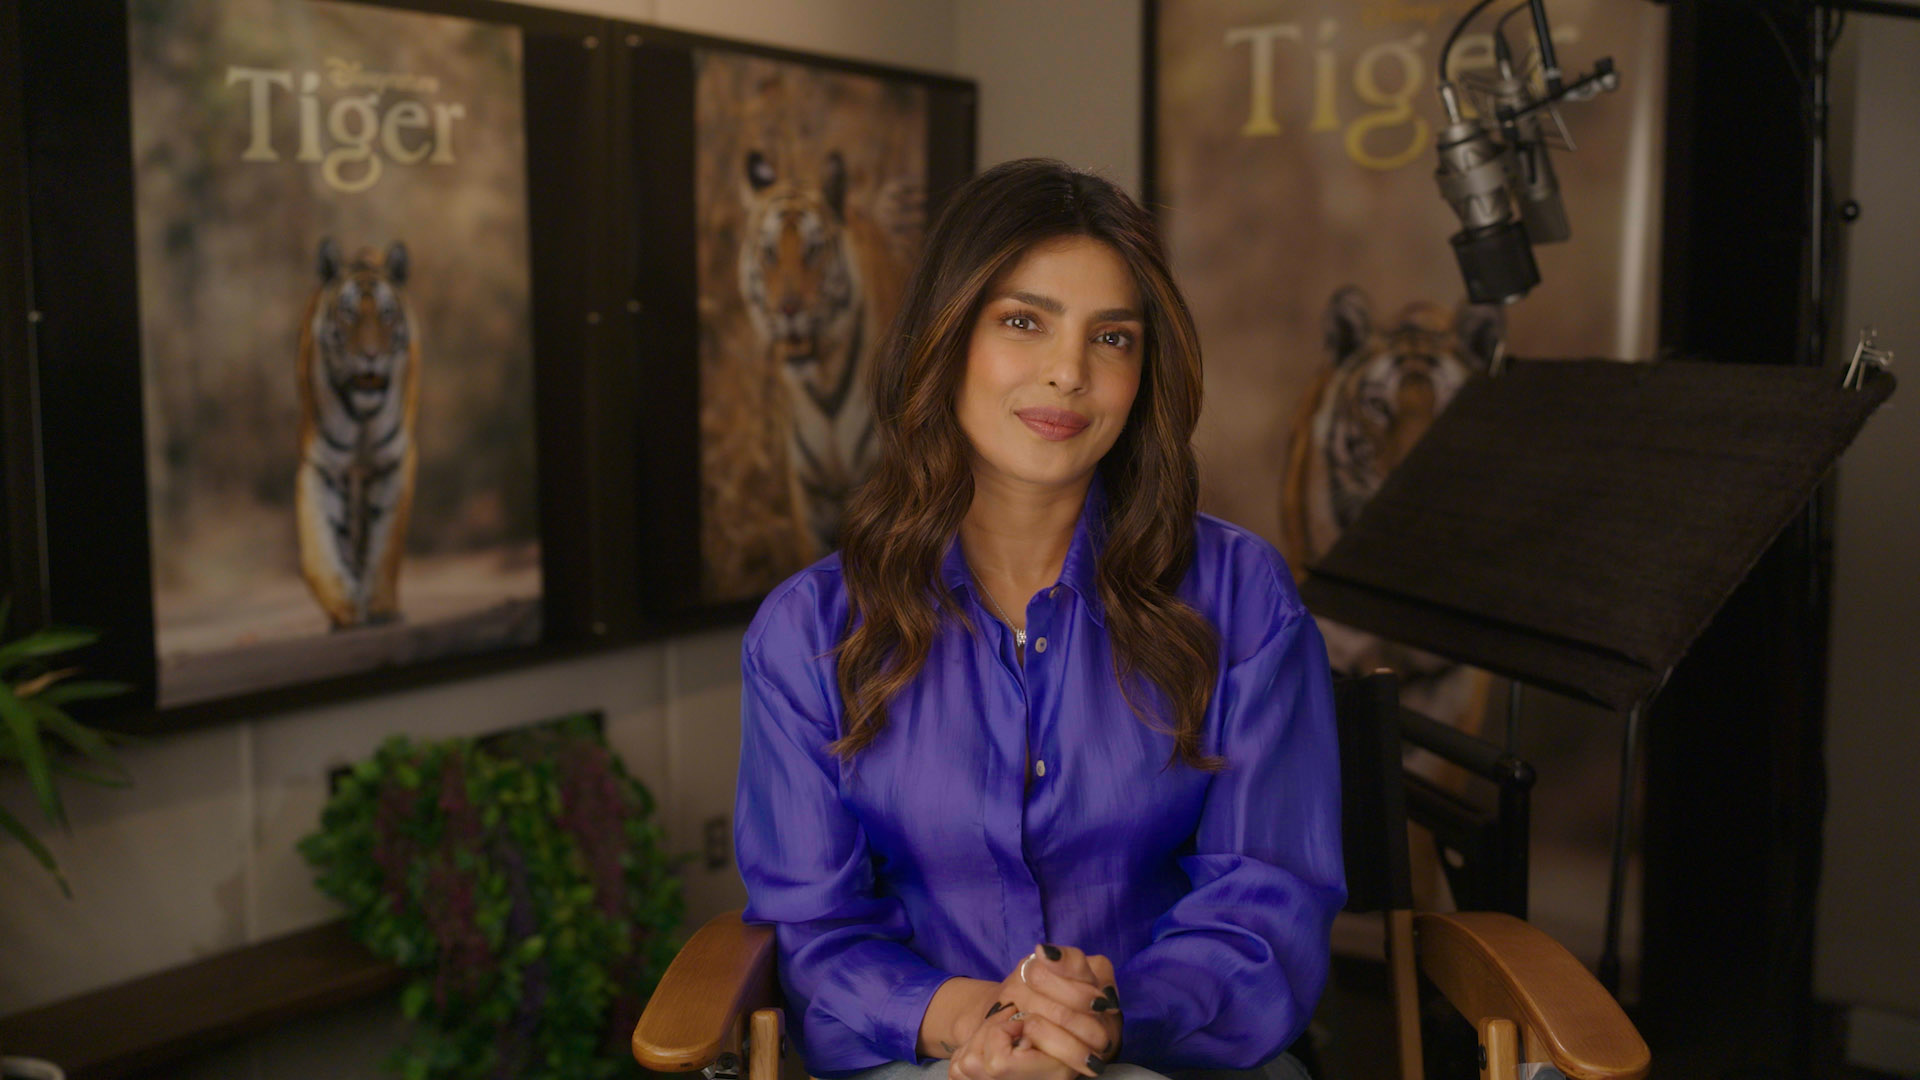 Disney+ Unveils Two Films For Earth Day: Tiger And Tigers On The Rise